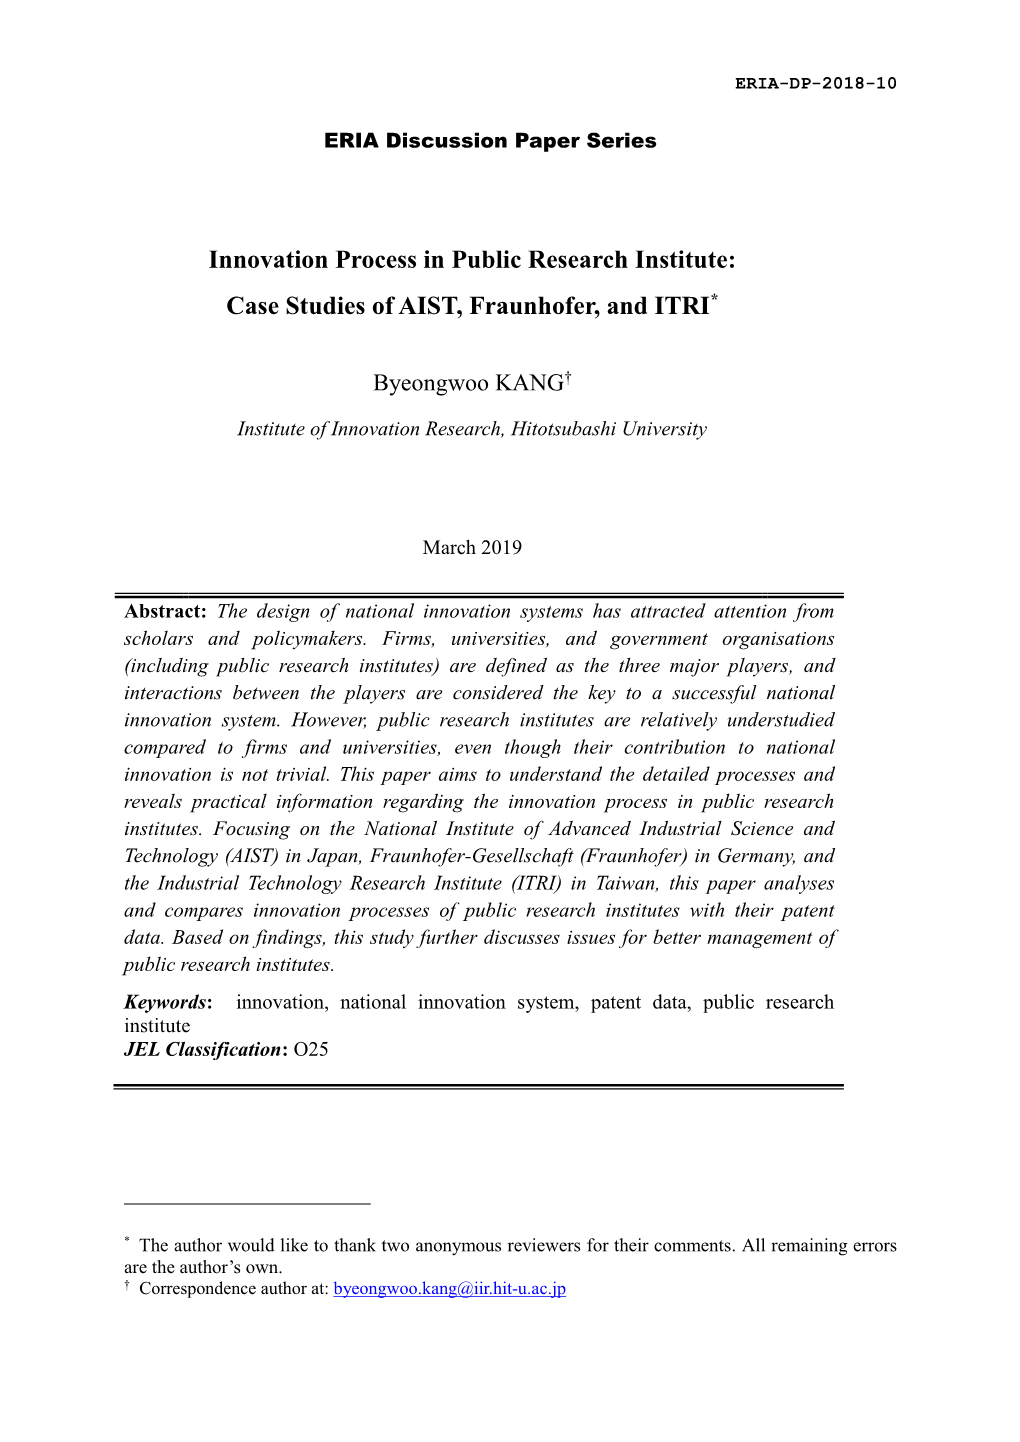 Innovation Process in Public Research Institute: Case Studies of AIST, Fraunhofer, and ITRI*